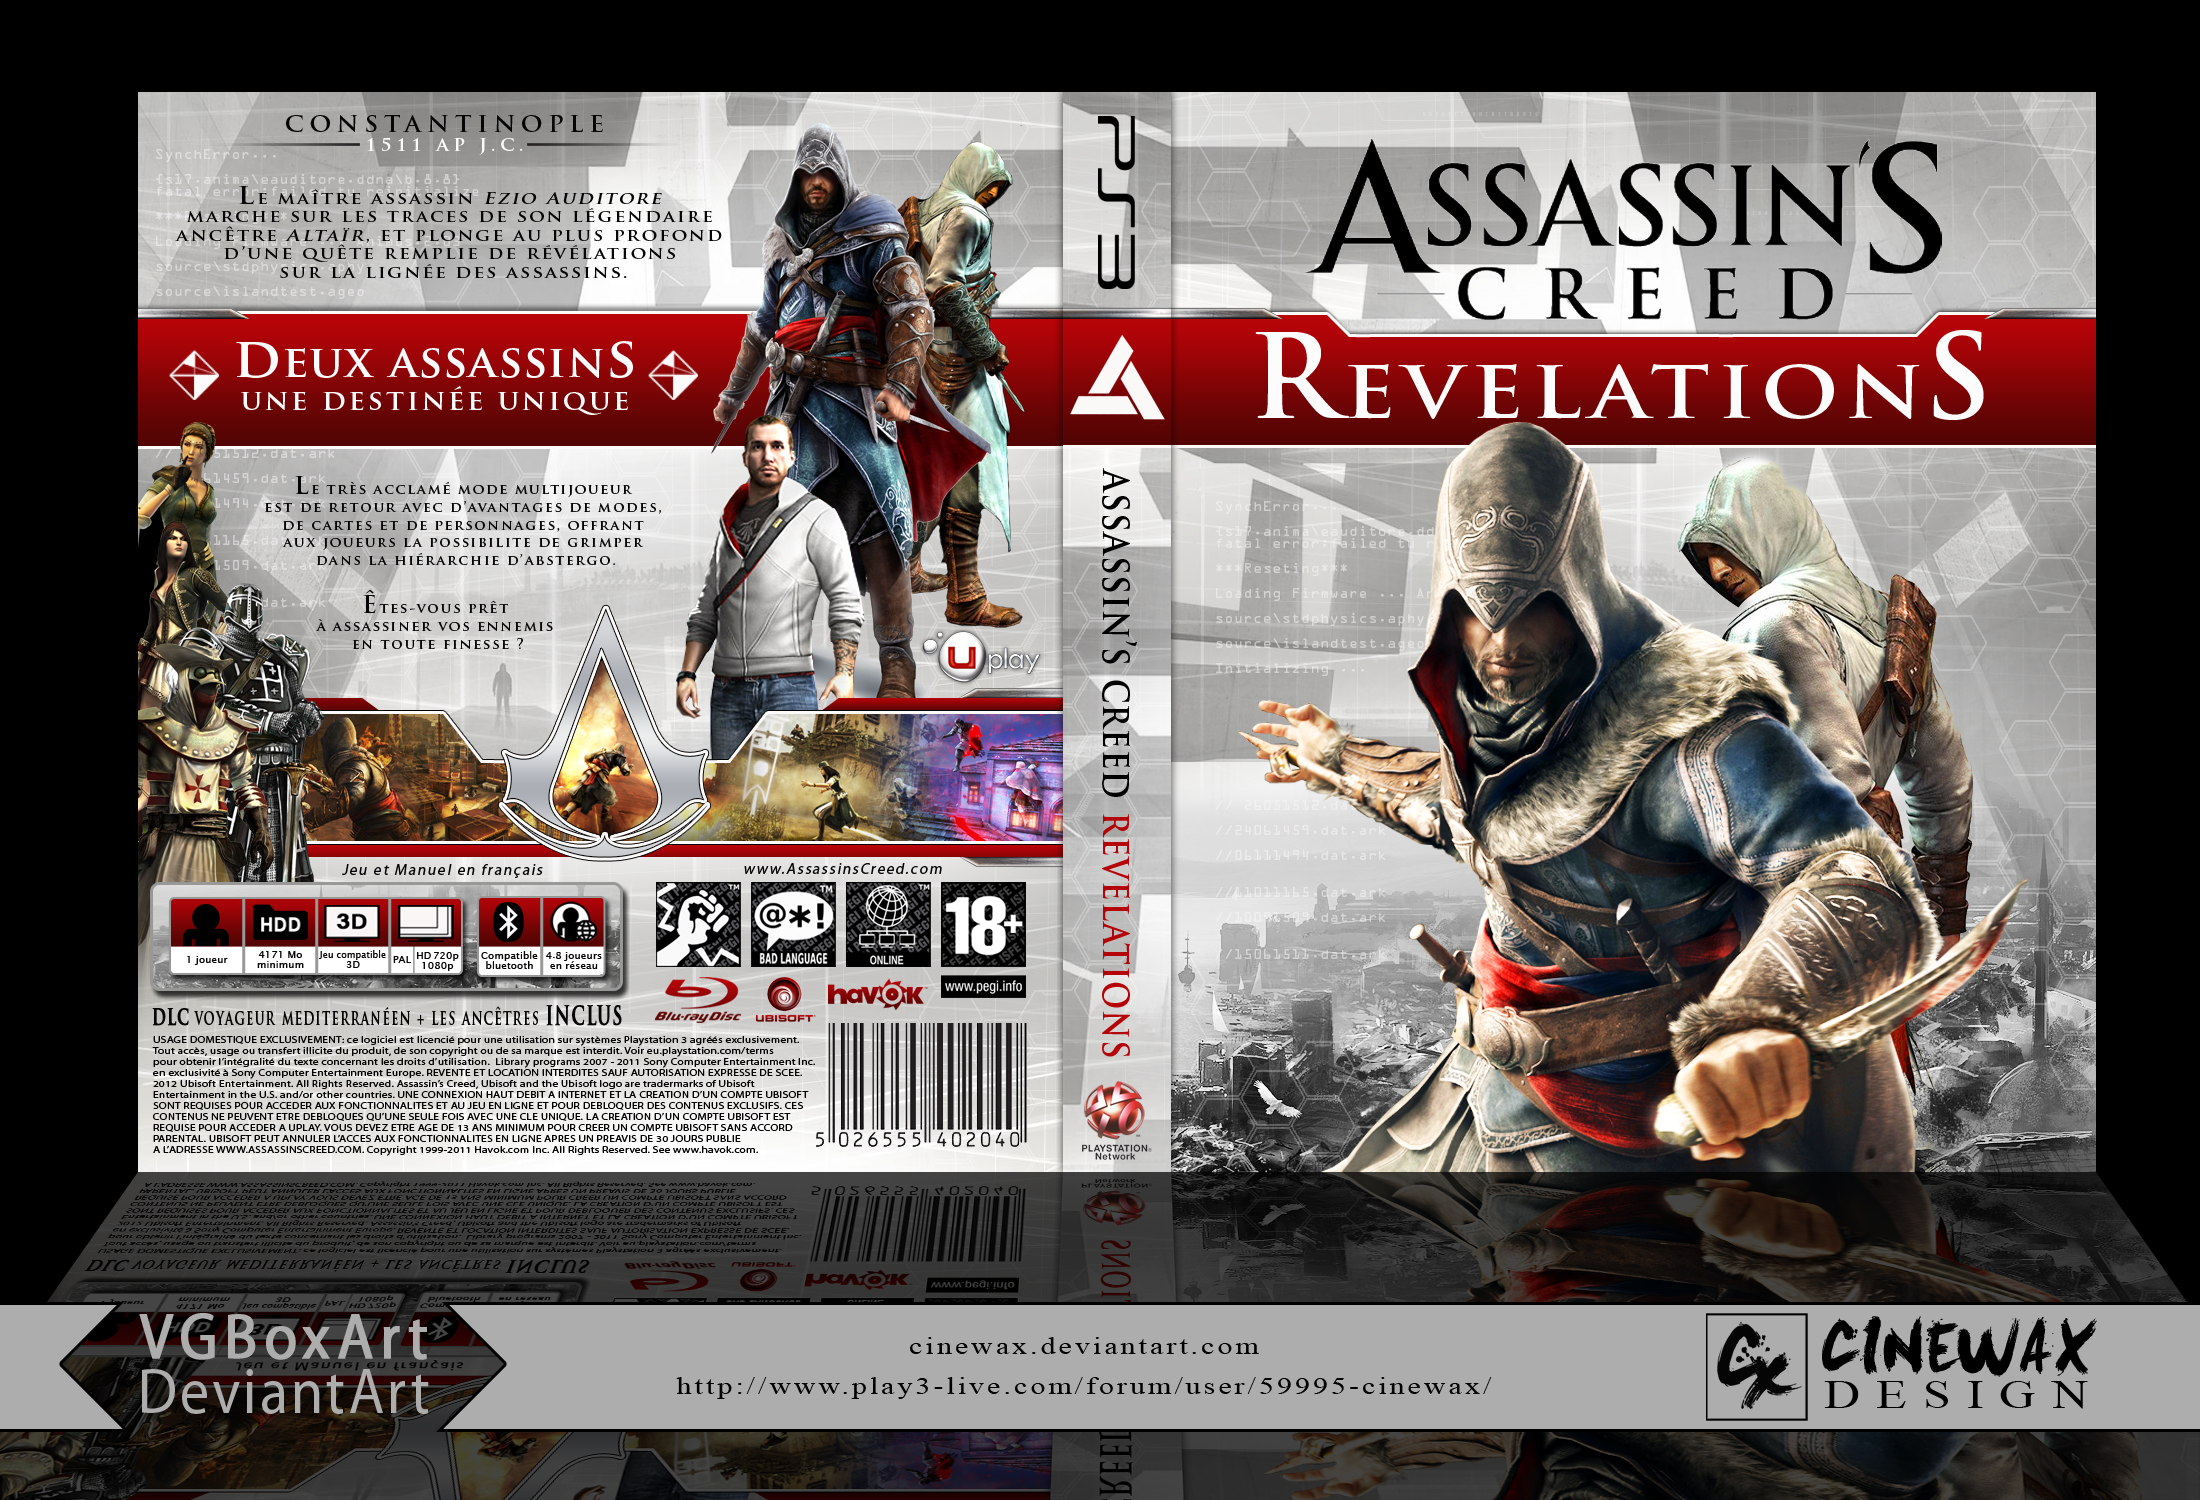 Assassin's Creed Revelations french box cover